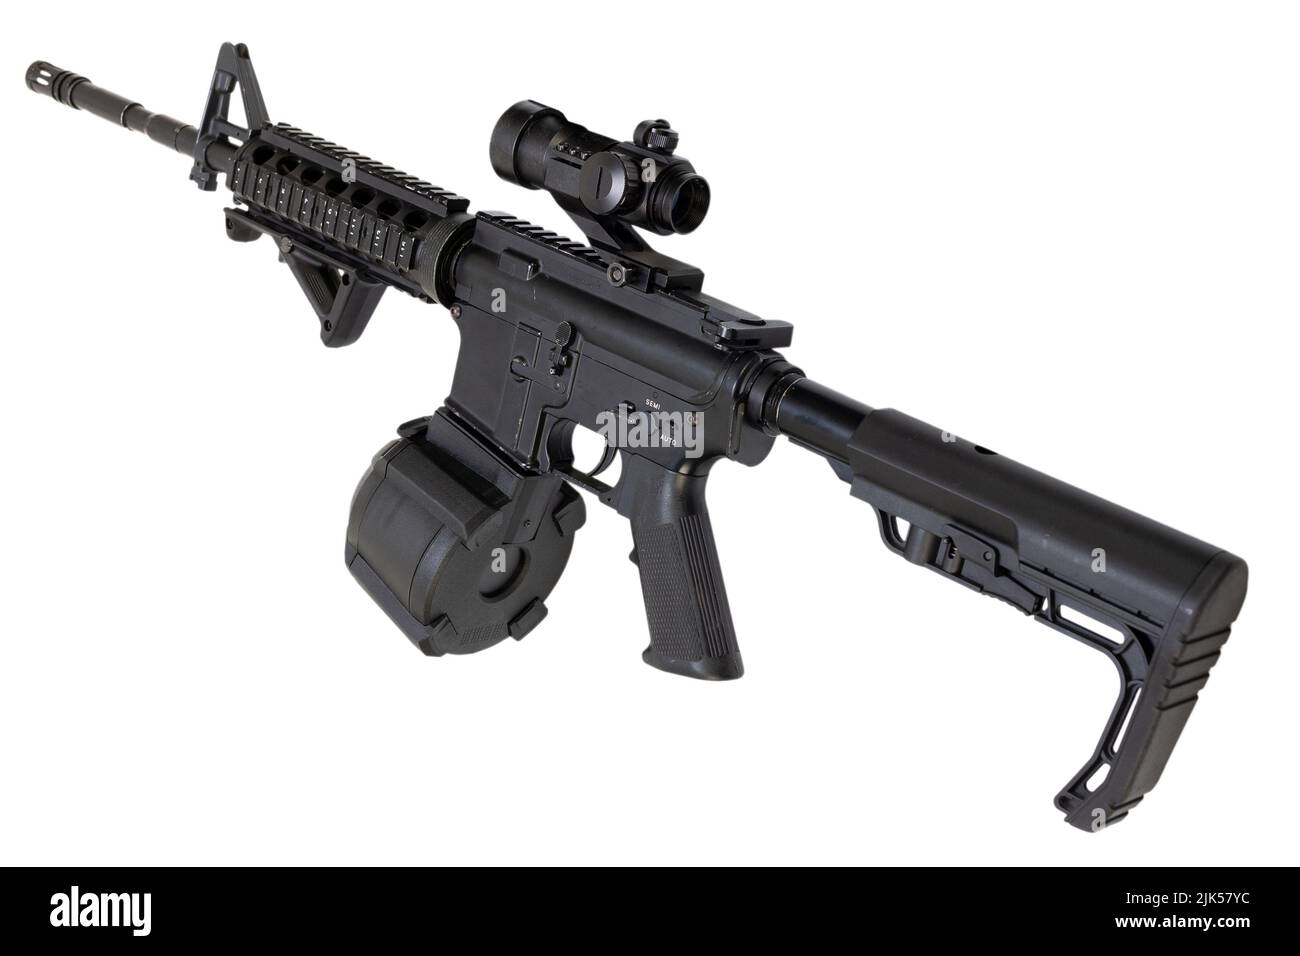 M4 assault rifle with optic scope and drum magazine isolated on a white background Stock Photo